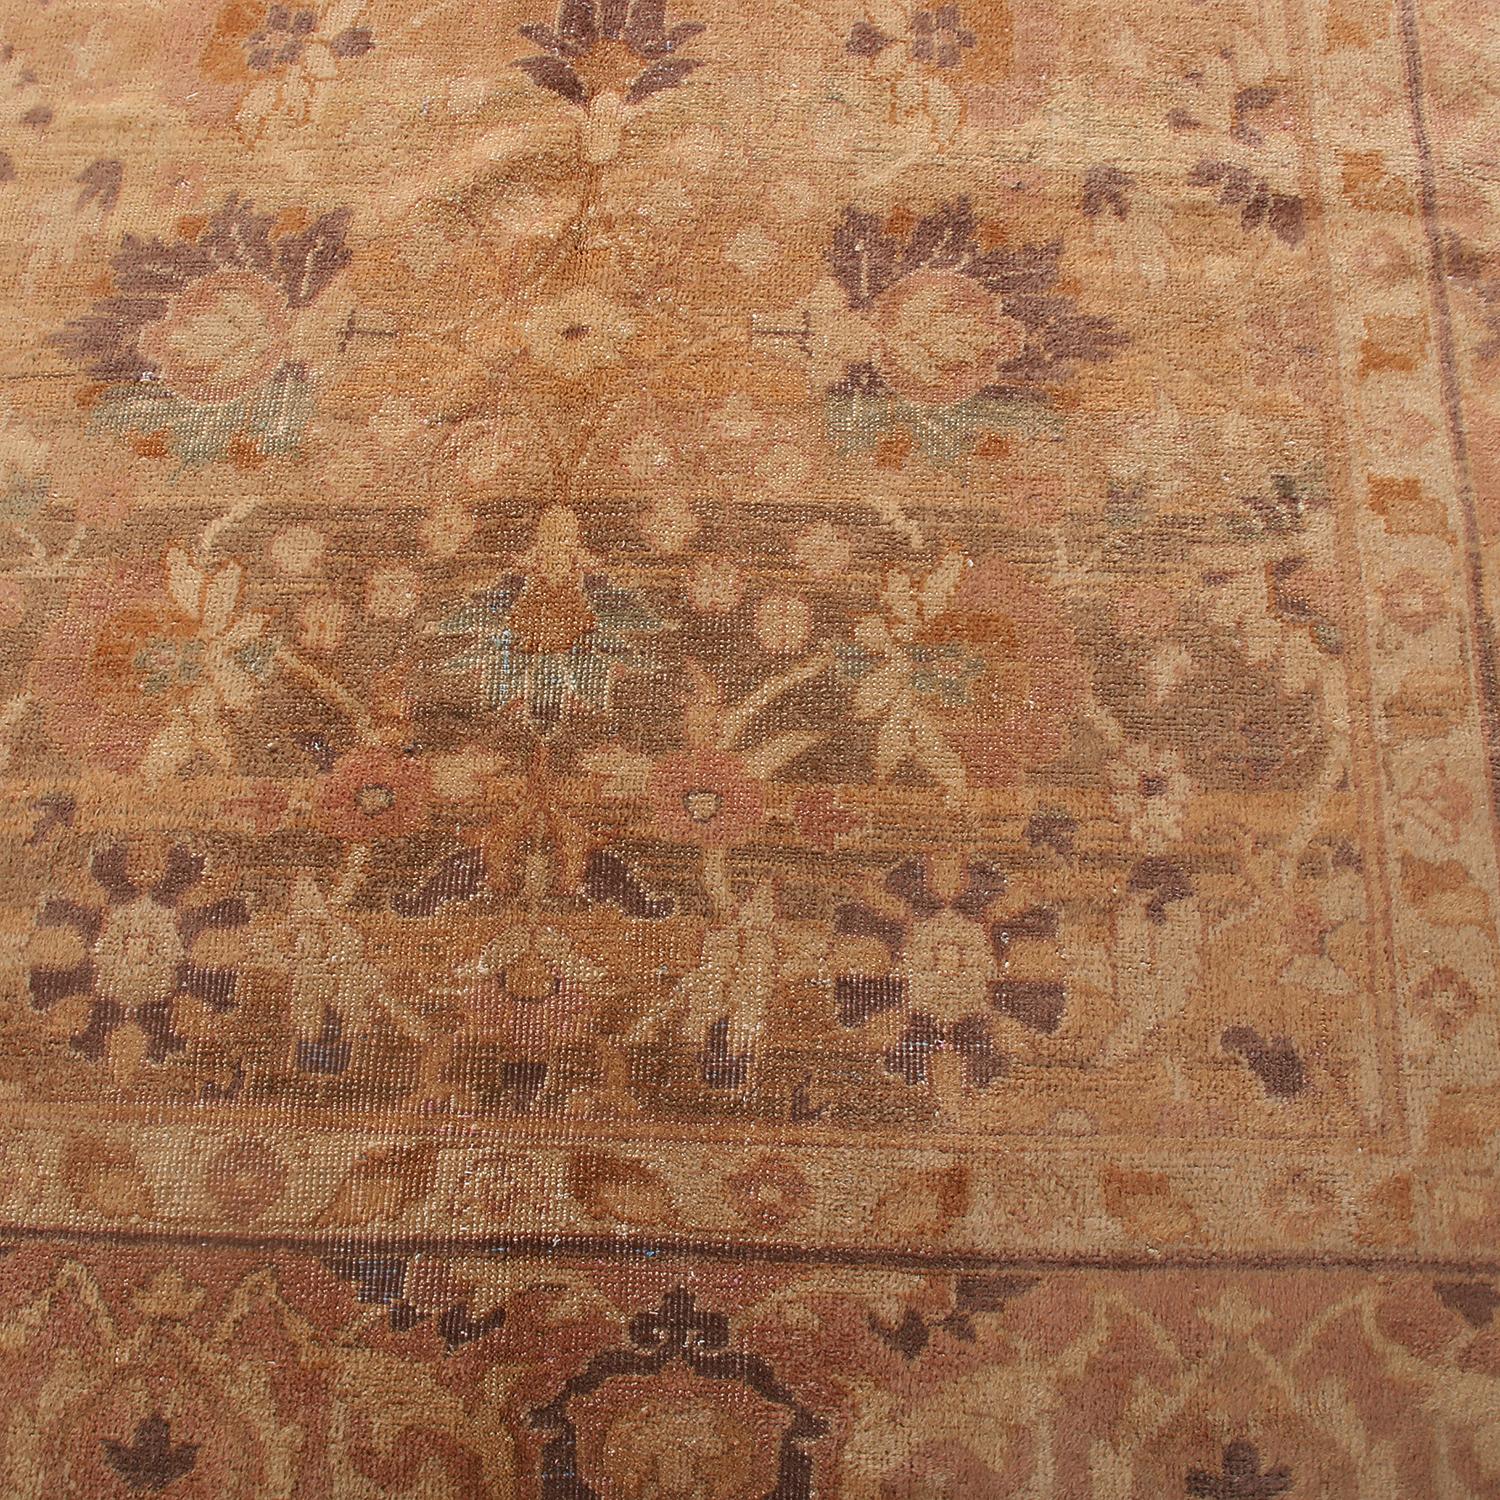 Turkish Antique Oushak Beige-Brown and Peach Wool Floral Rug